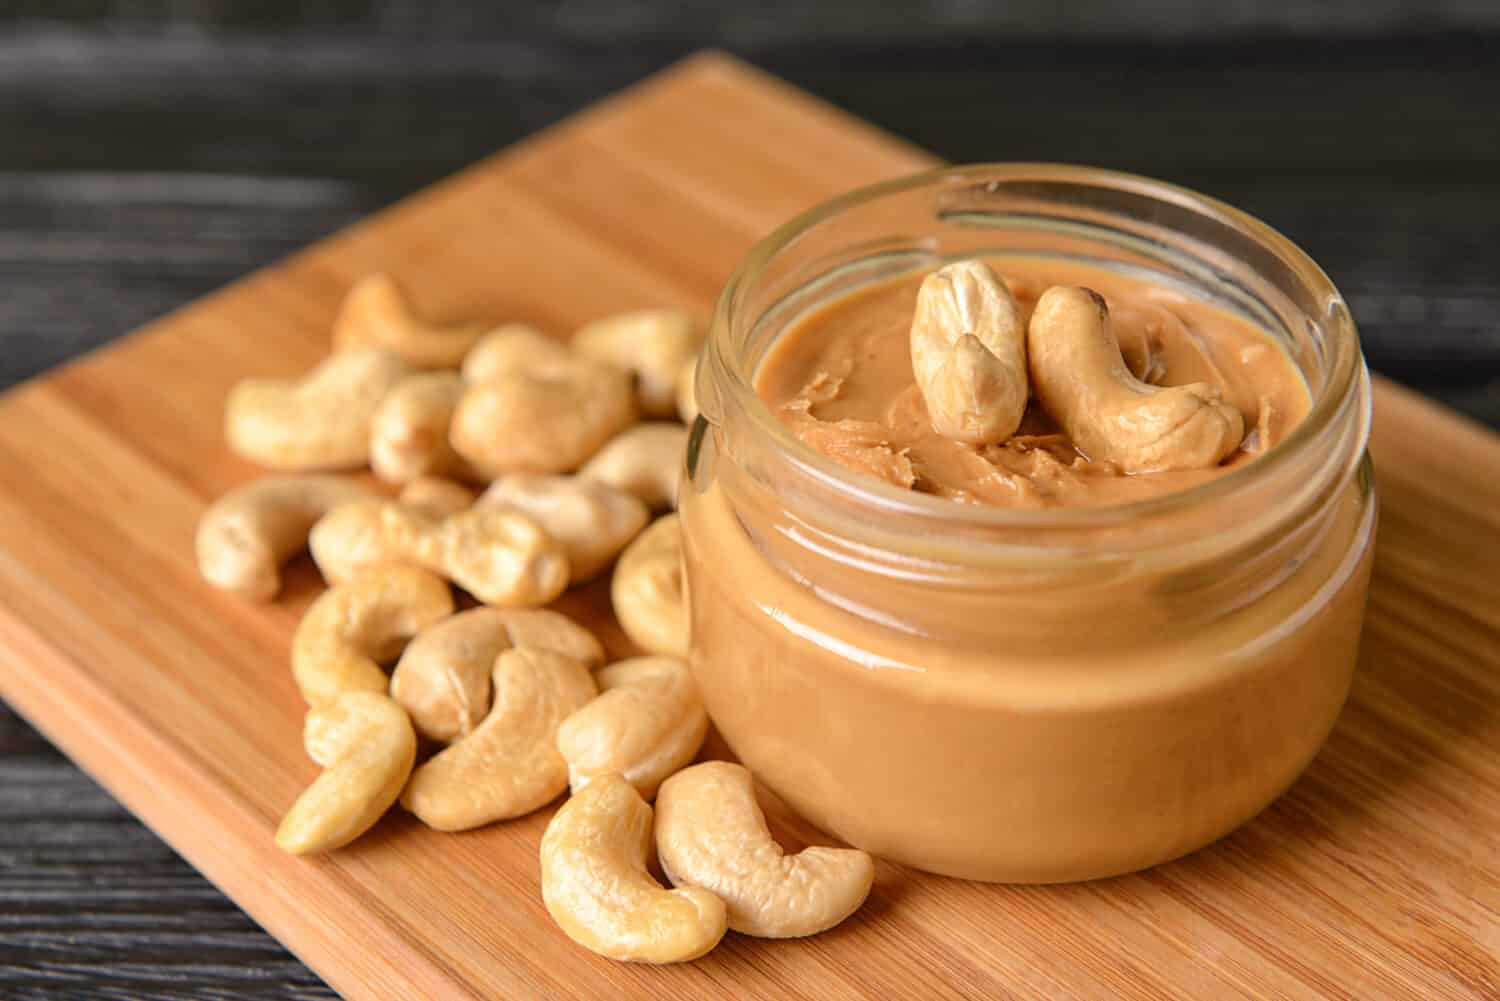 Jar of cashew butter on wooden table